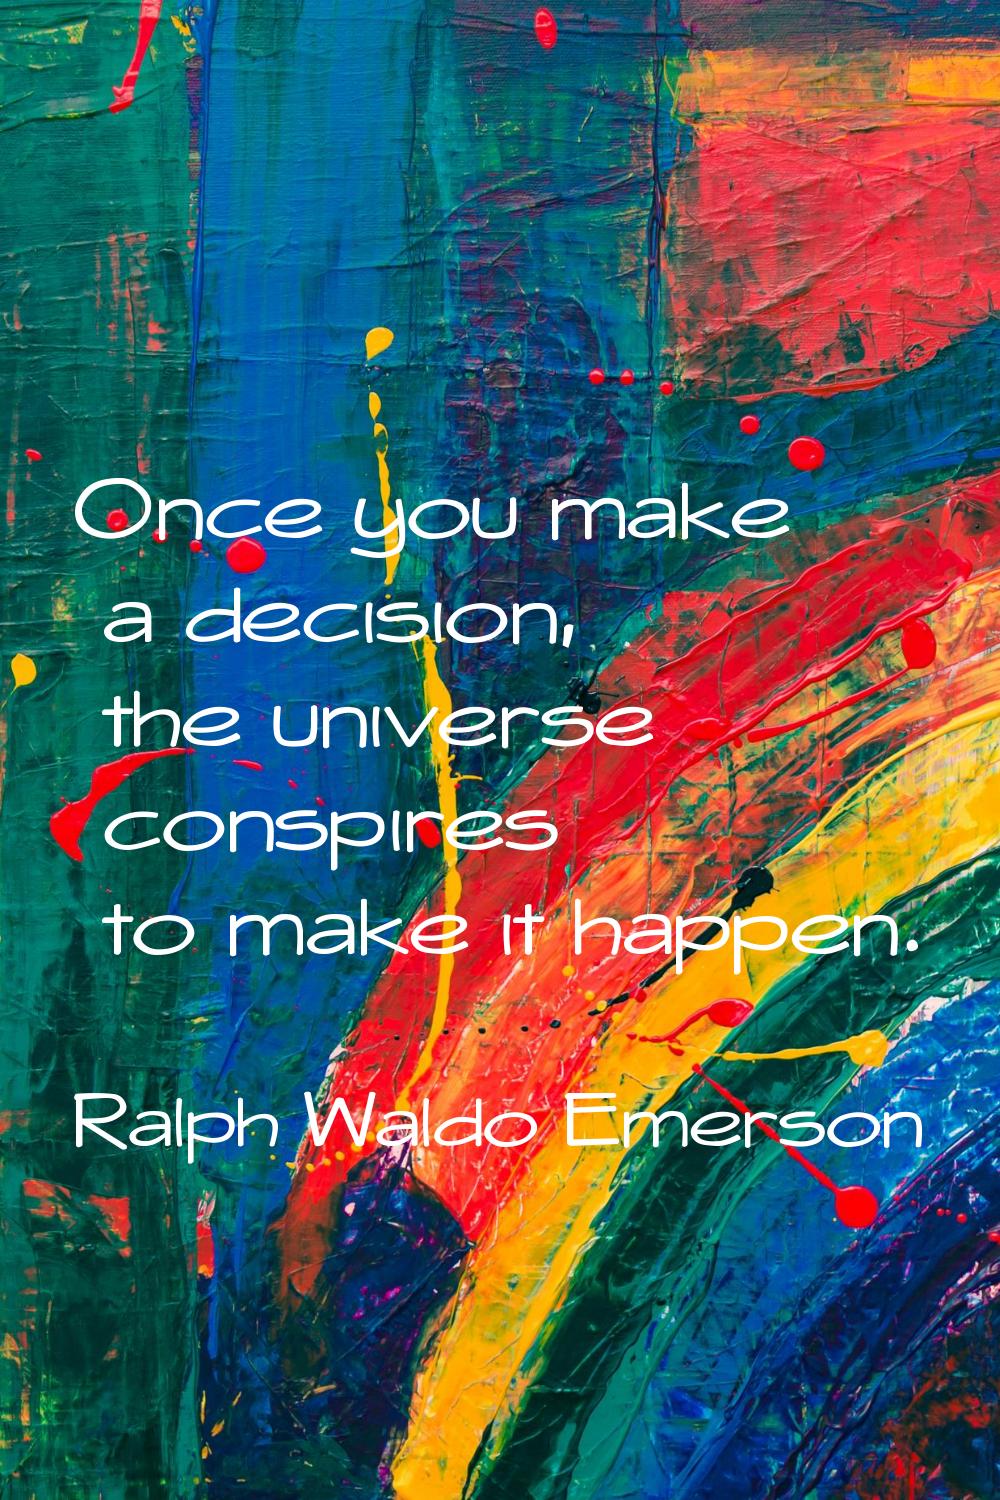 Once you make a decision, the universe conspires to make it happen.